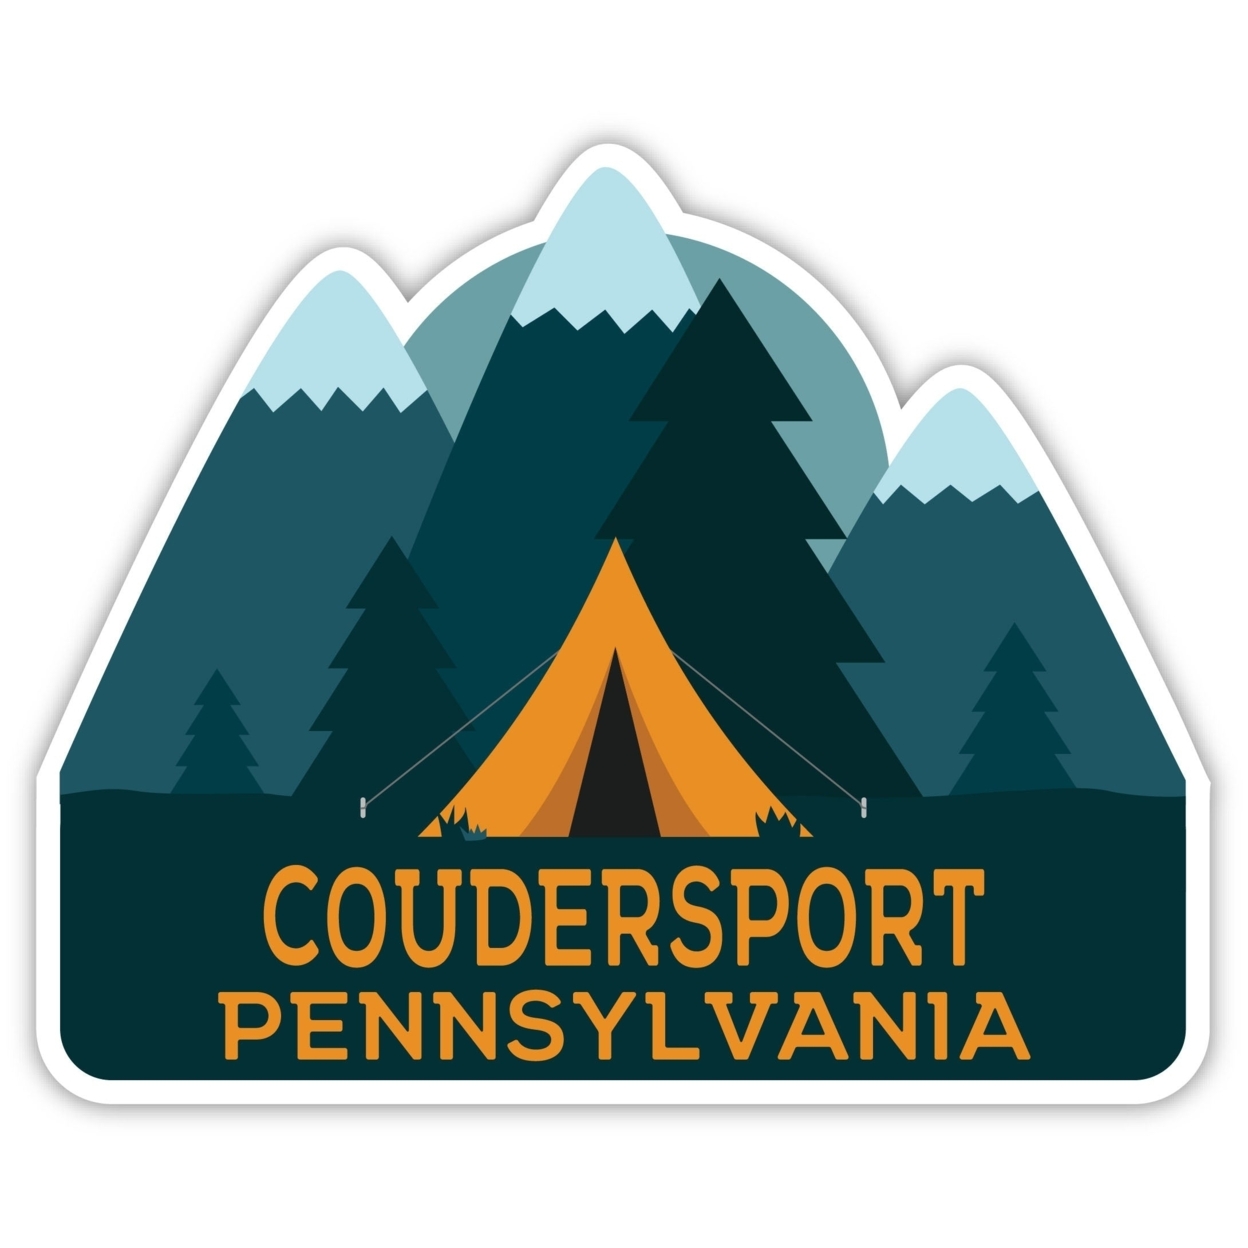 Coudersport Pennsylvania Souvenir Decorative Stickers (Choose Theme And Size) - 4-Pack, 2-Inch, Bear